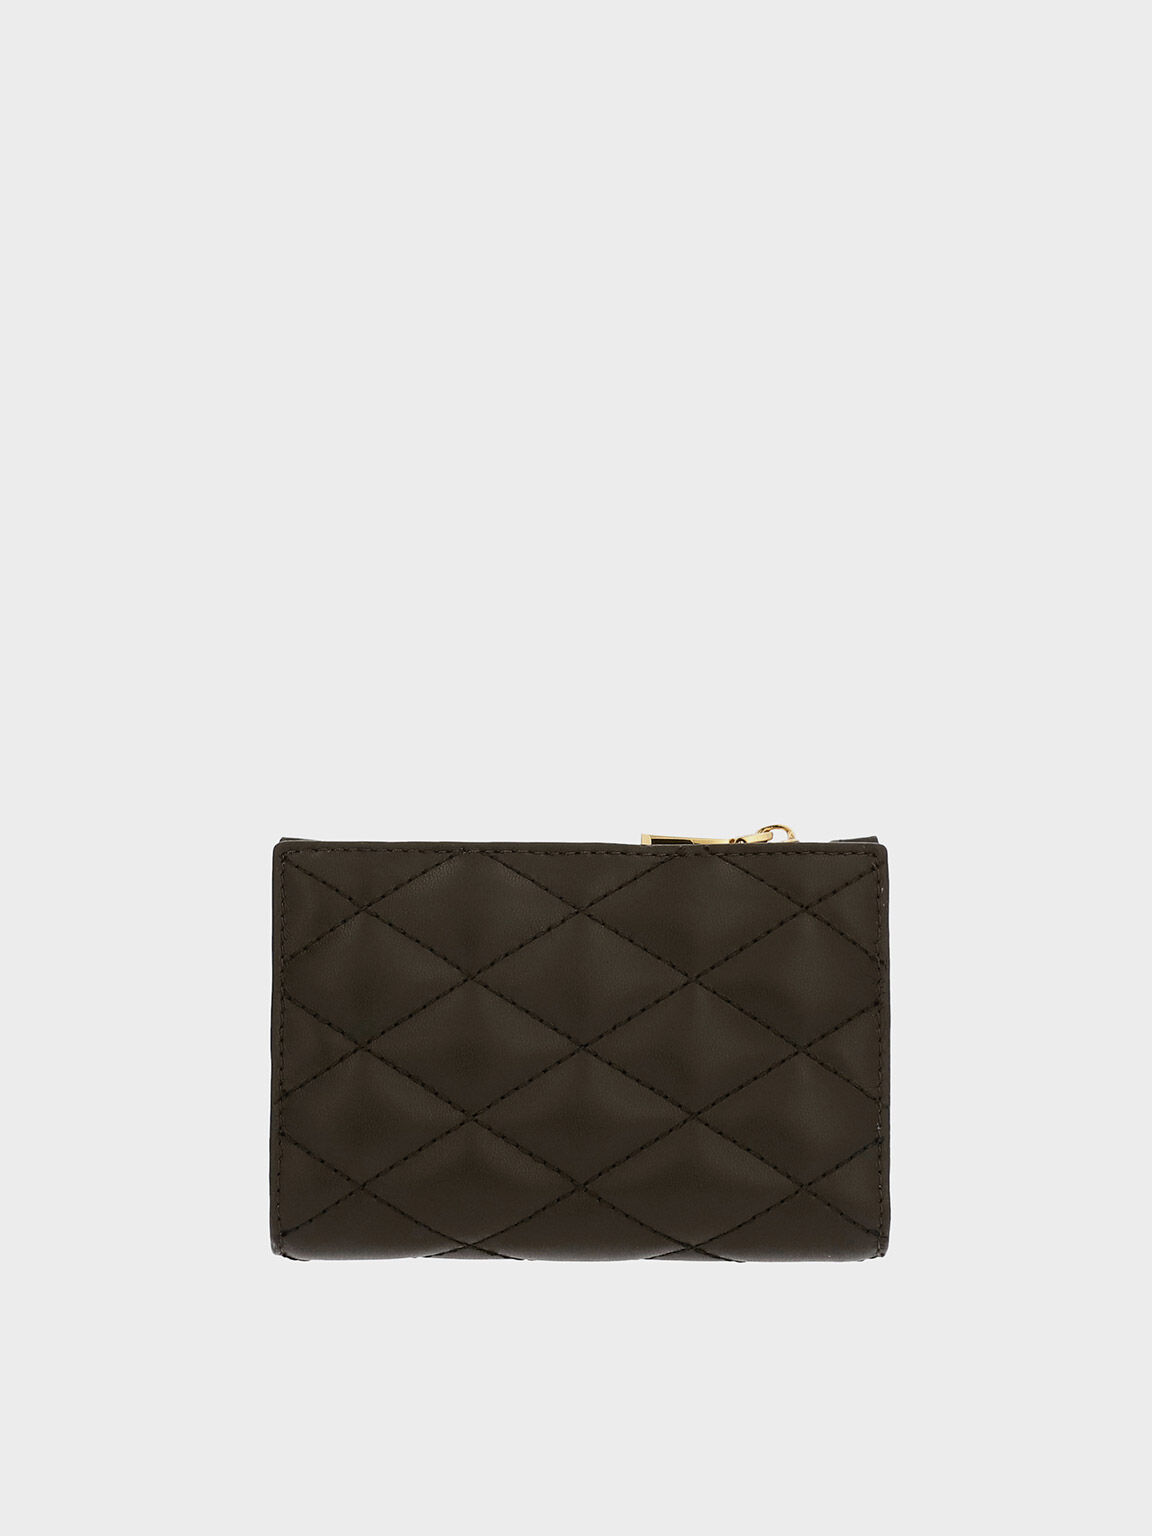 Lillie Quilted Mini Wallet, Dark Moss, hi-res